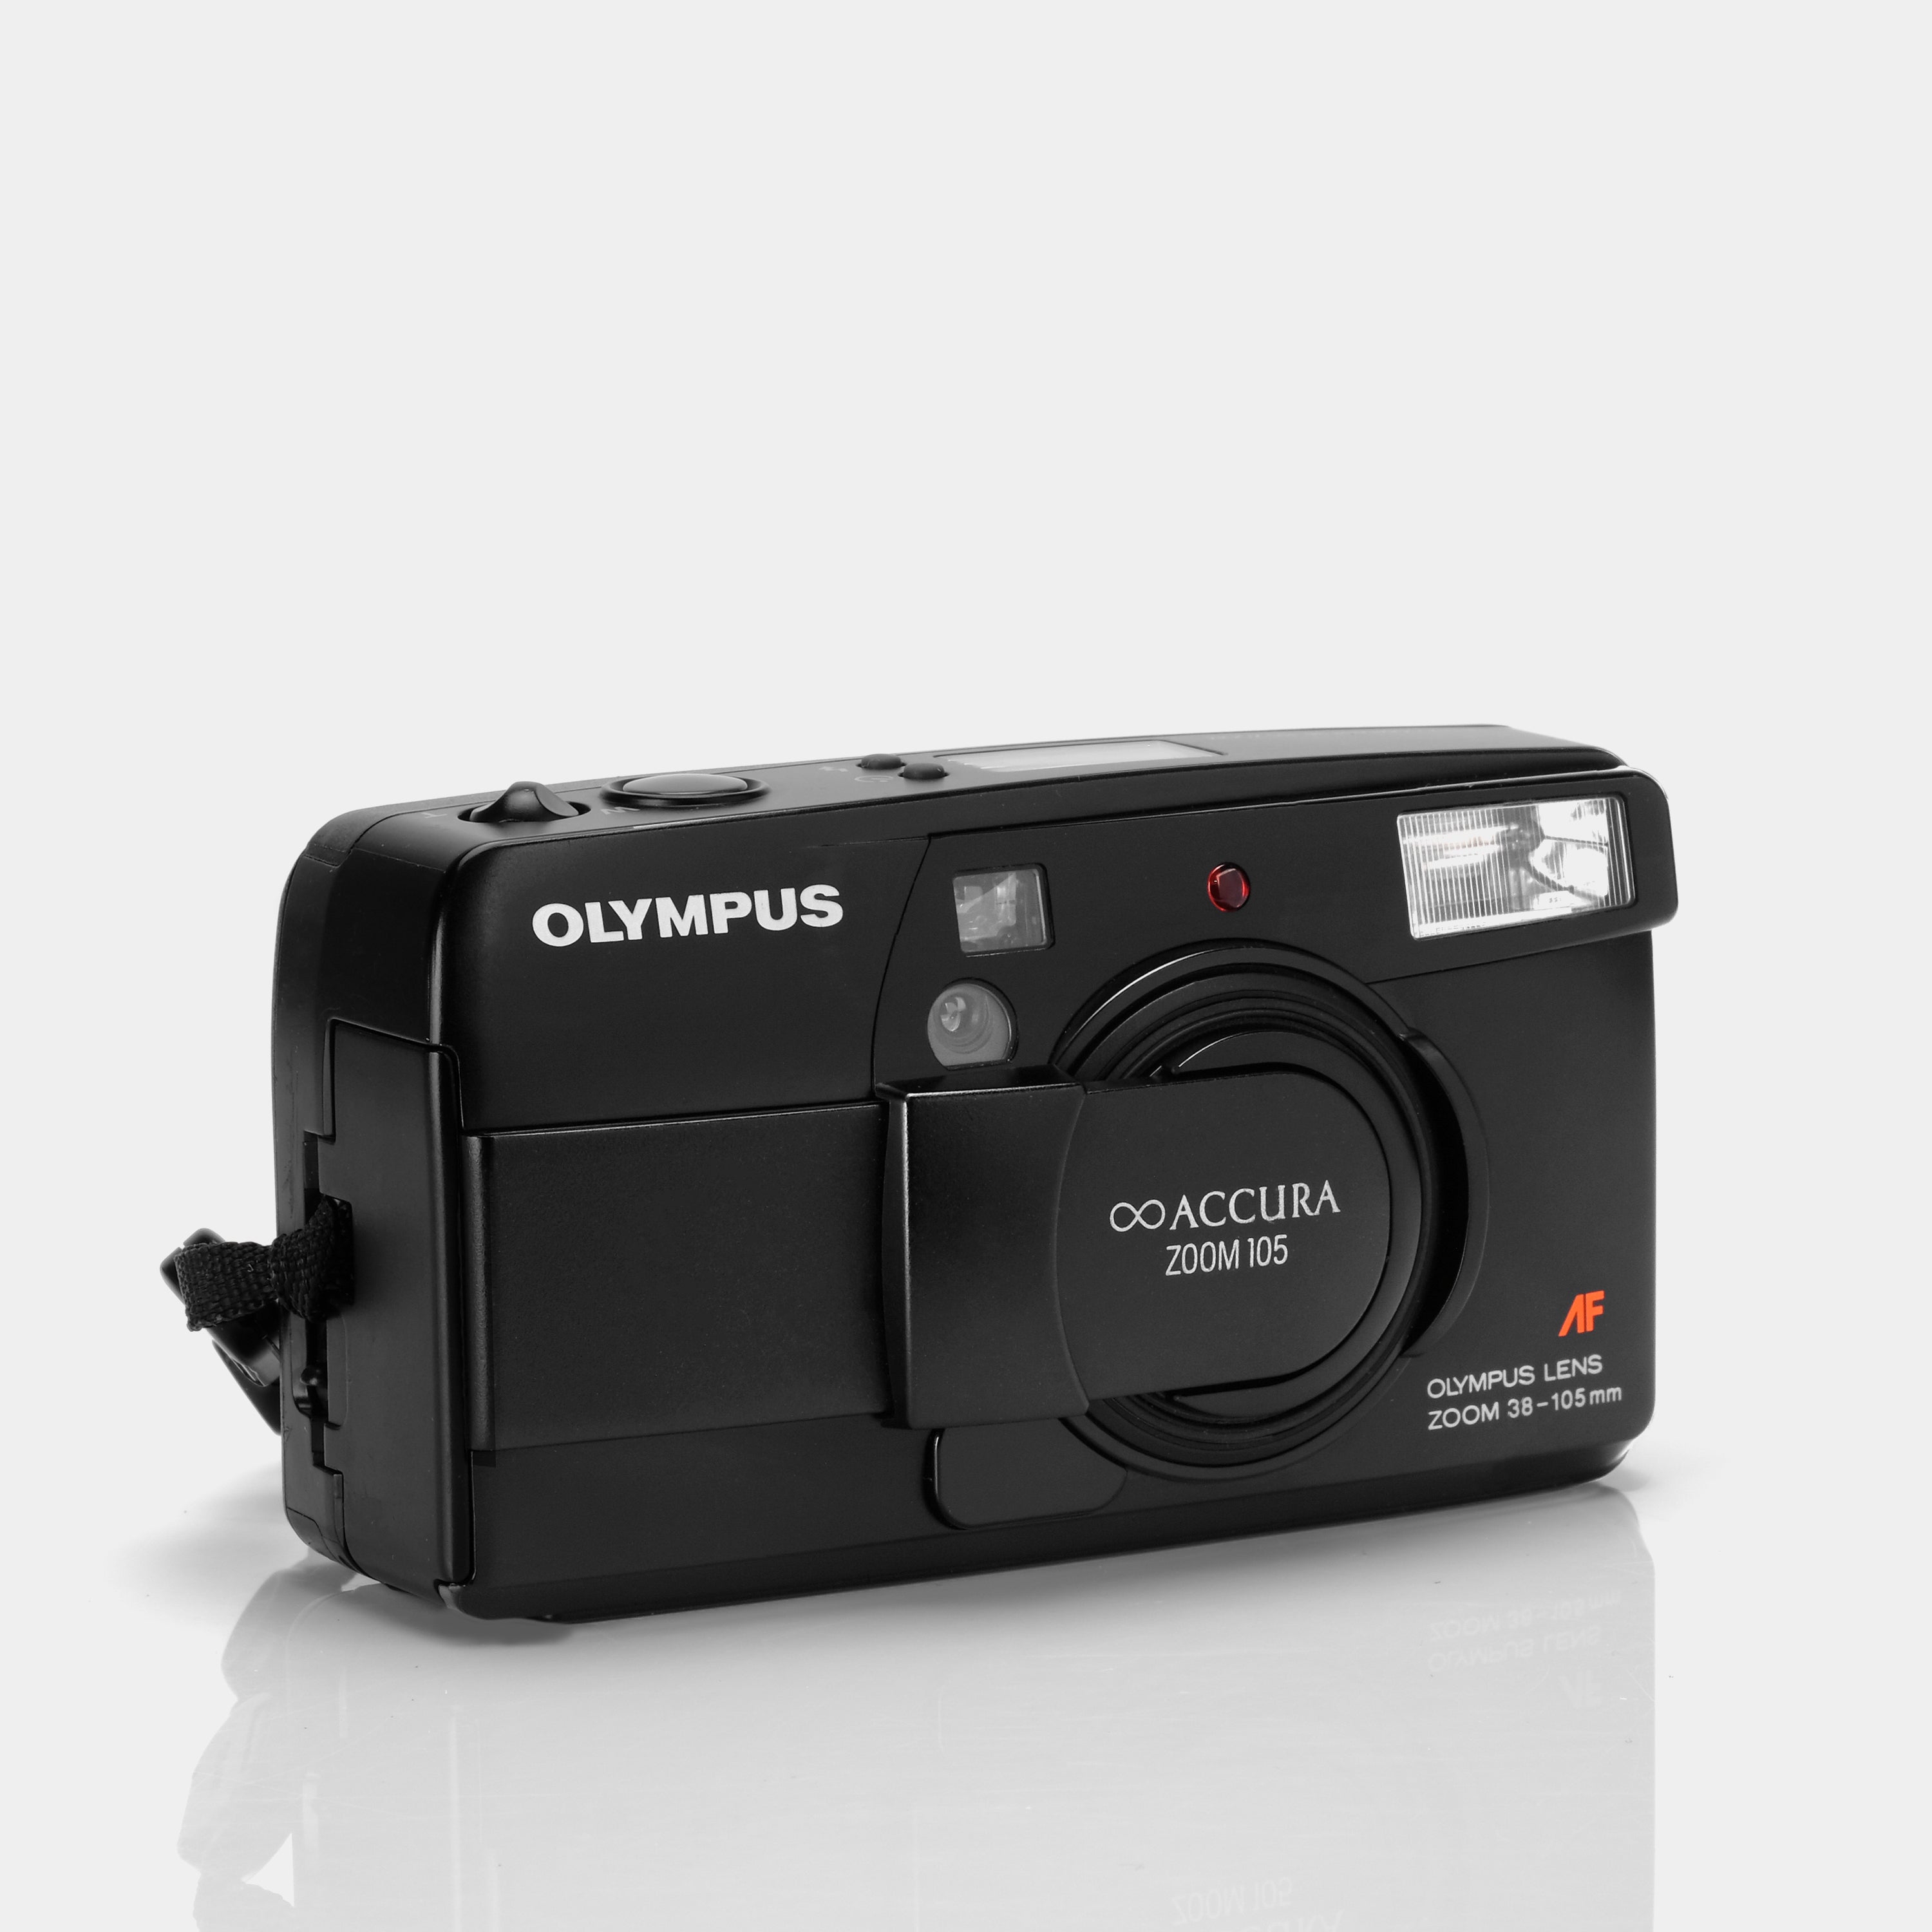 Olympus ∞ Accura Zoom 105 35mm Point and Shoot Film Camera